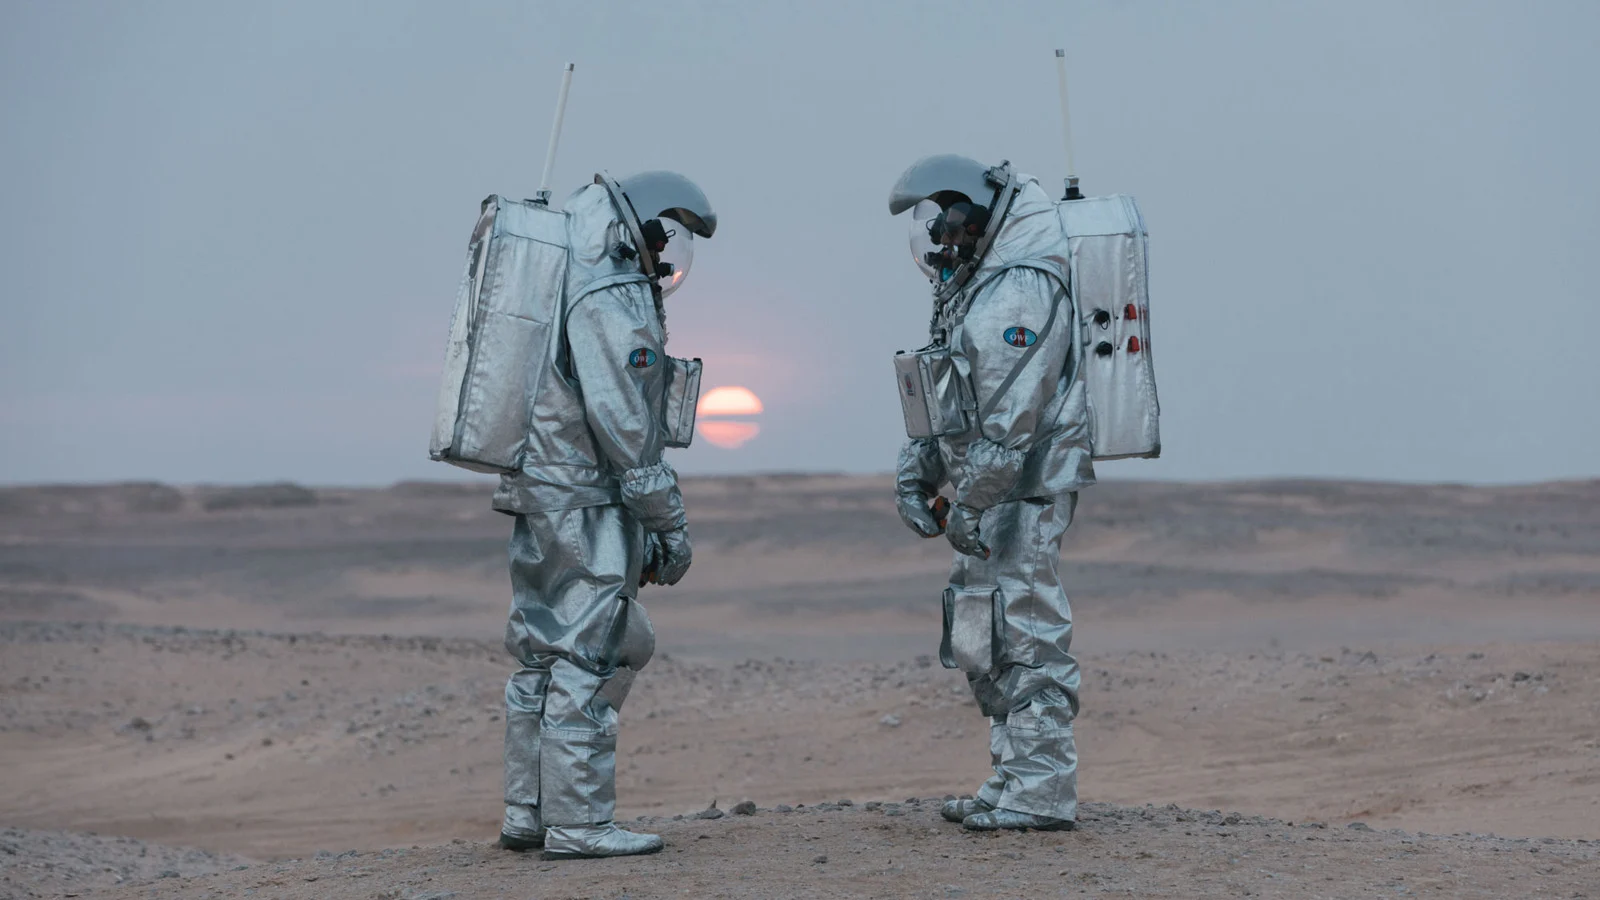 Want to travel to Mars? Conscientiousness will be your key to succeed